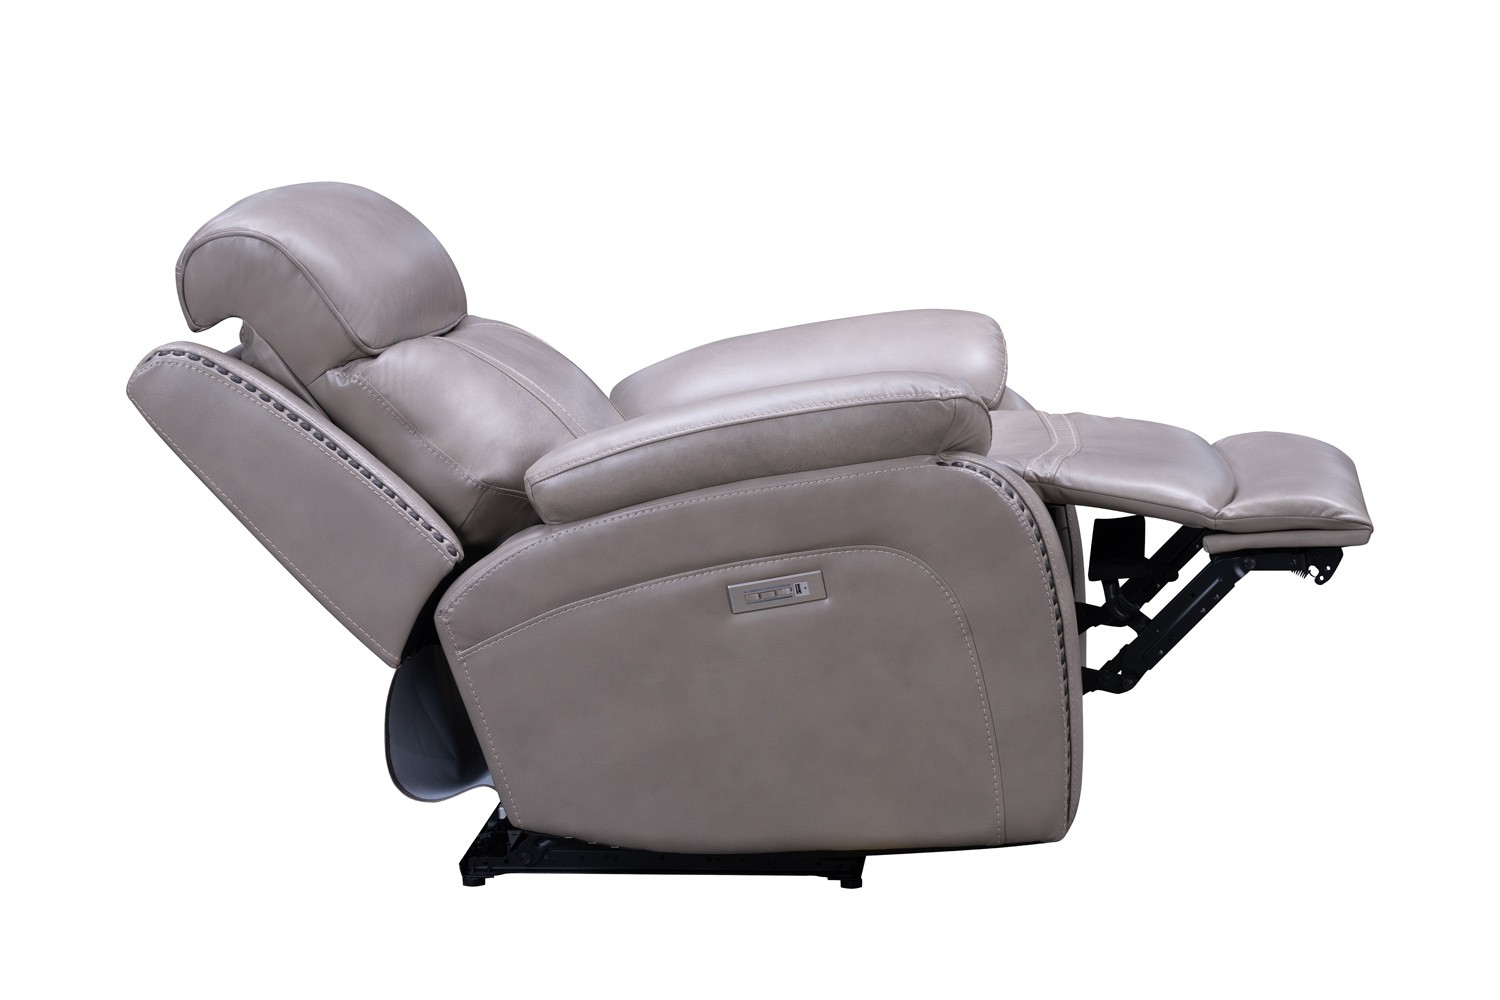 Barcalounger Sandover Power Recliner Chair with Power Head Rest and Lumbar - Sergi Gray Beige/Leather Match